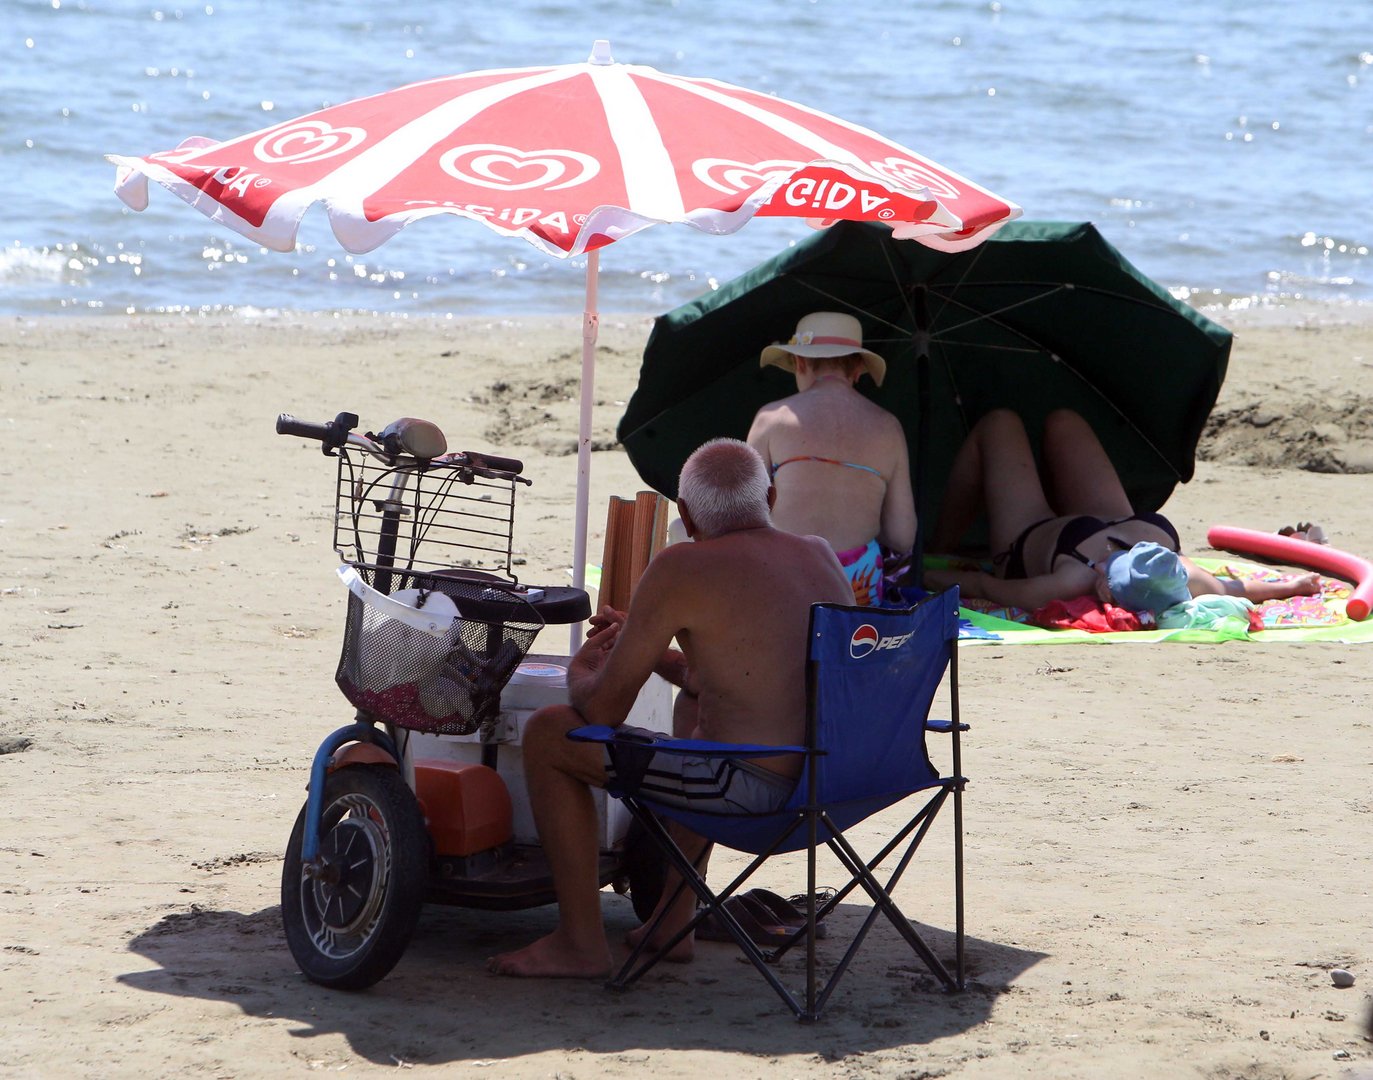 image ‘Particularly hot’ August seen in Cyprus says Met office